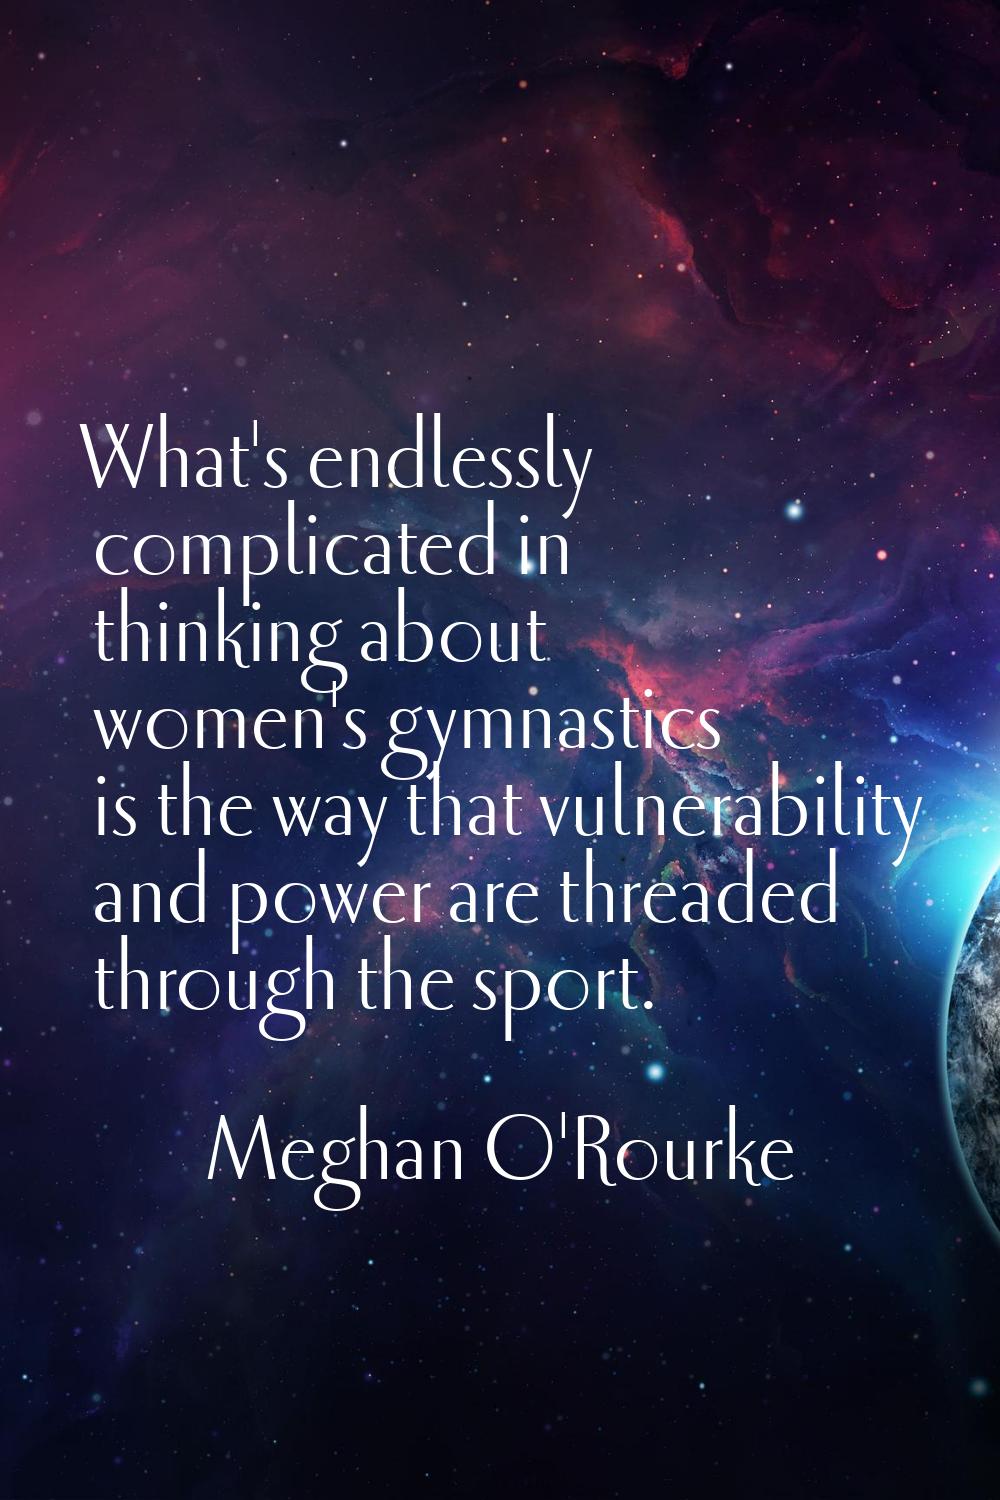 What's endlessly complicated in thinking about women's gymnastics is the way that vulnerability and